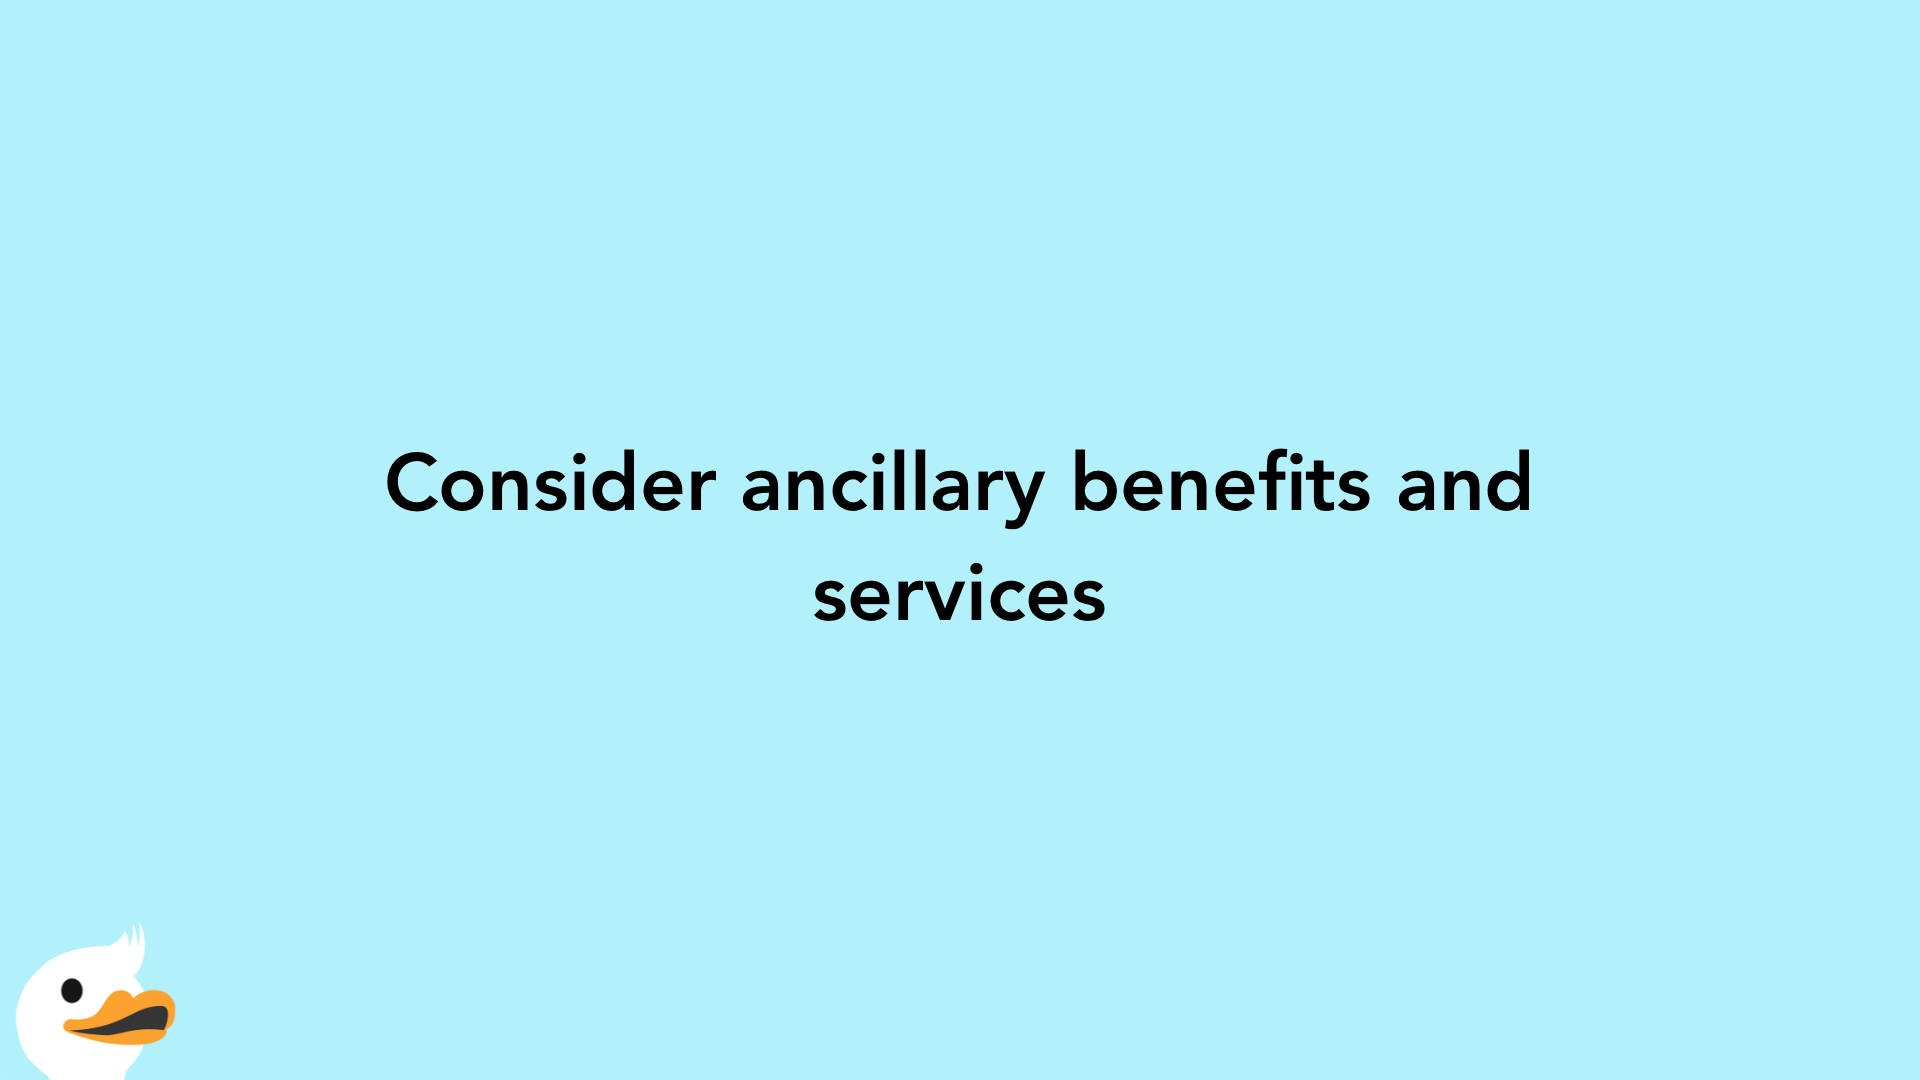 Consider ancillary benefits and services